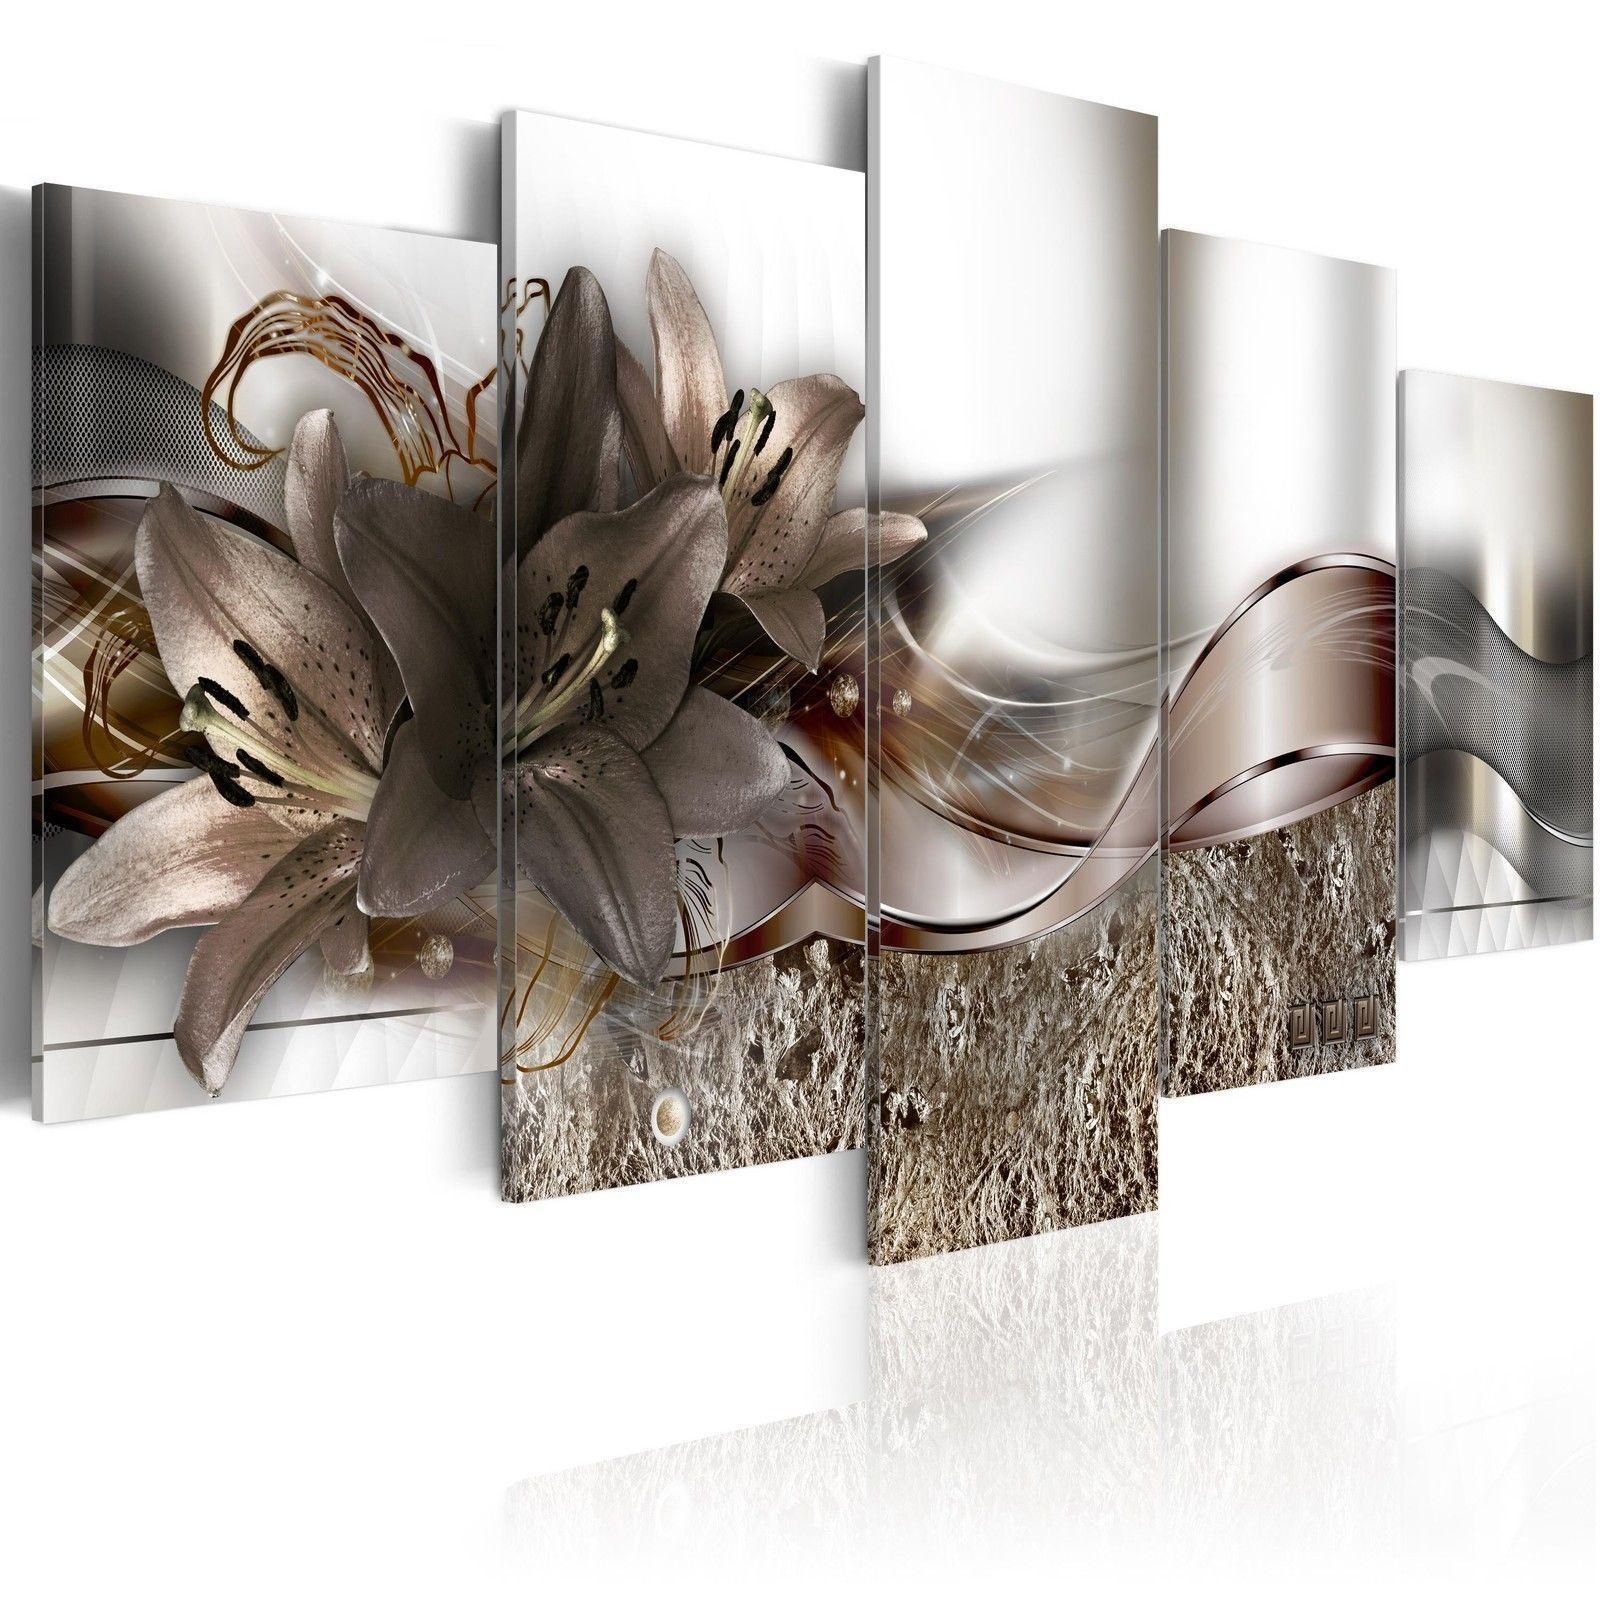 5 Panels Large Abstract Flowers Print Pictures Canvas Wall Art Prints  Unframed Paintings For Home Decorations Regarding Abstract Bar And Panel Wall Decor (View 16 of 30)